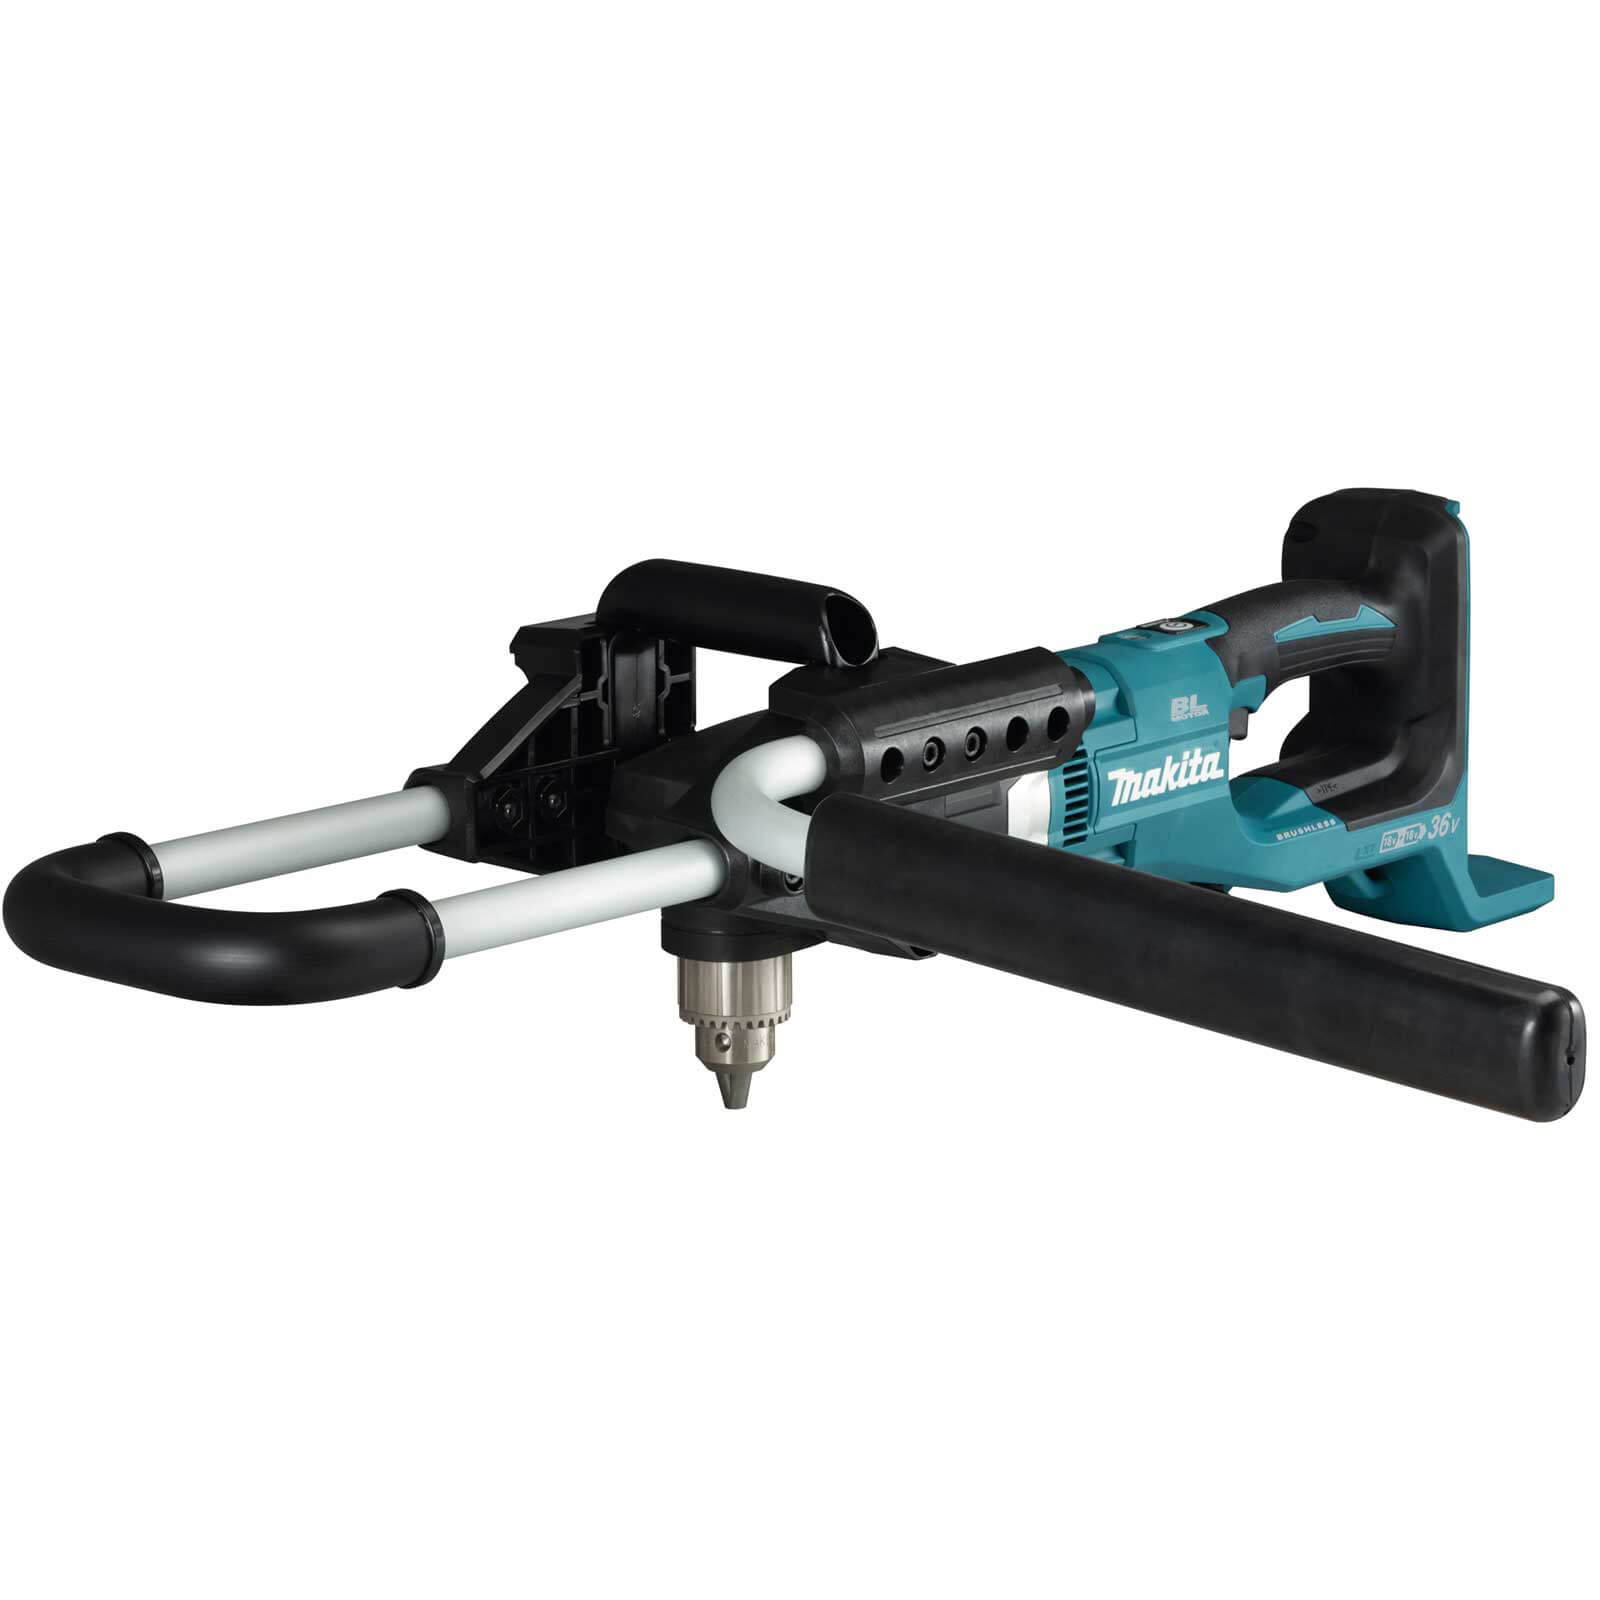 Photo of Makita Ddg460 18v Lxt Cordless Brushless Earth Auger No Batteries No Charger No Case